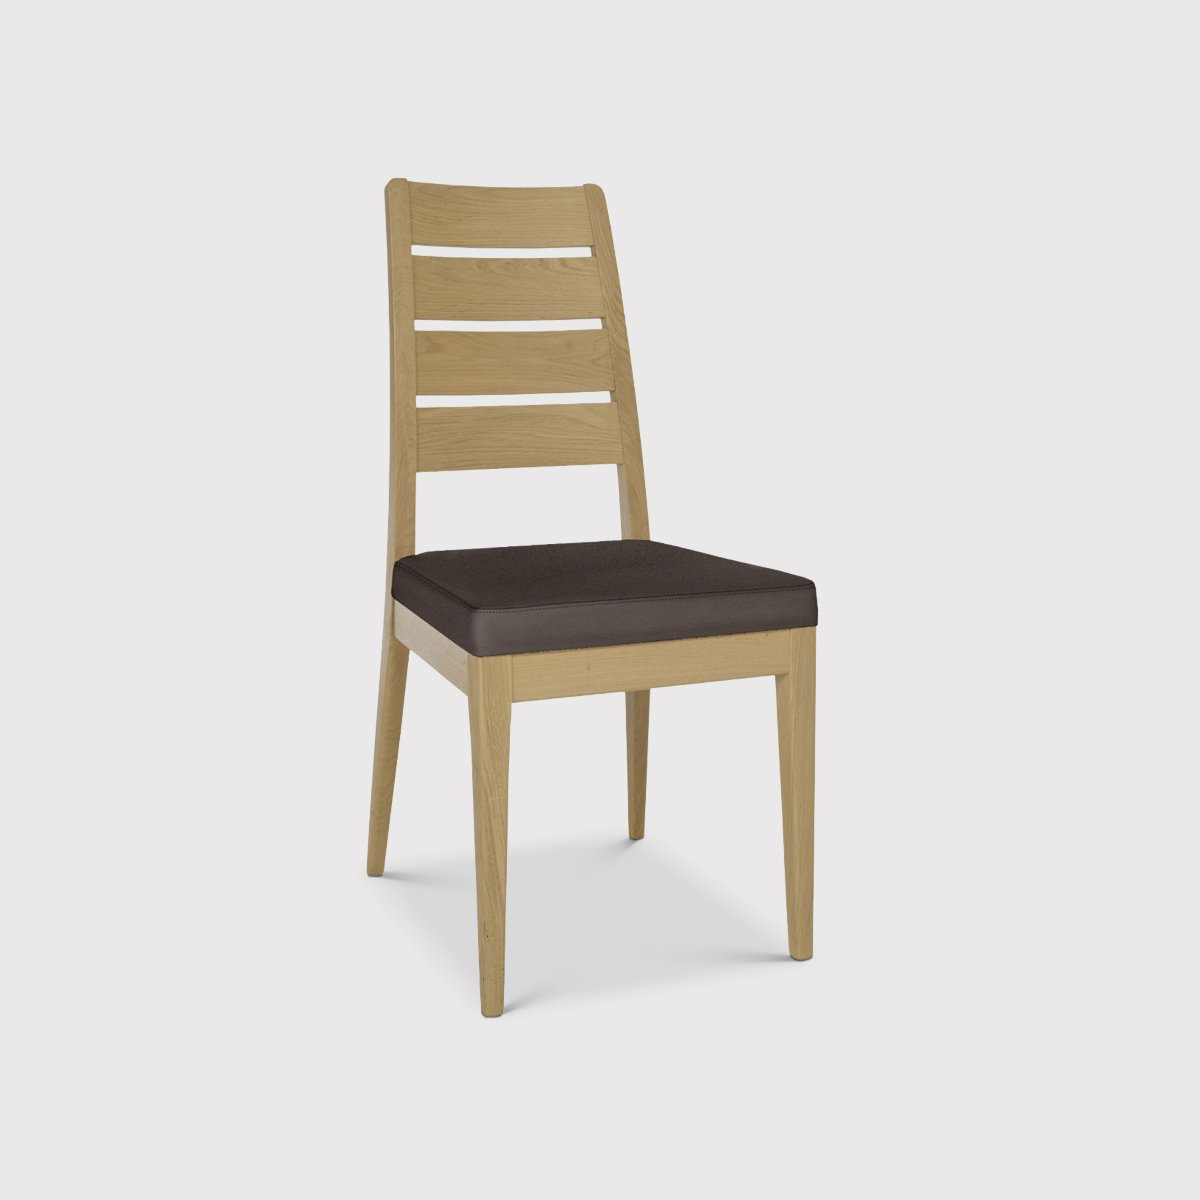 Ercol Romana Dining Chair, Brown | Barker & Stonehouse